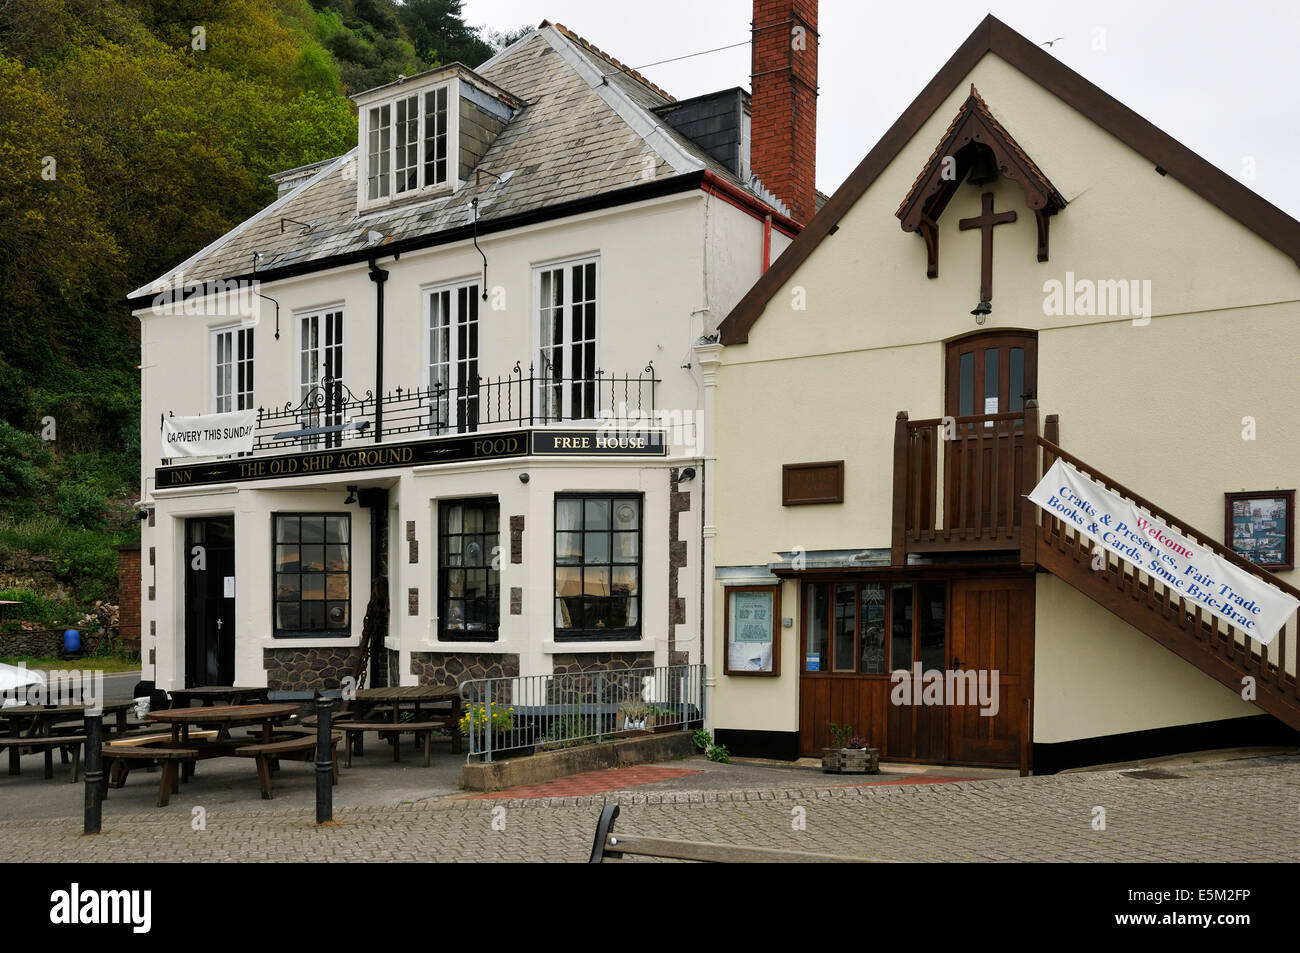 The Old Ship Aground Inn &  St Peter on the Quay Church, Minehead Harbour Stock Photo